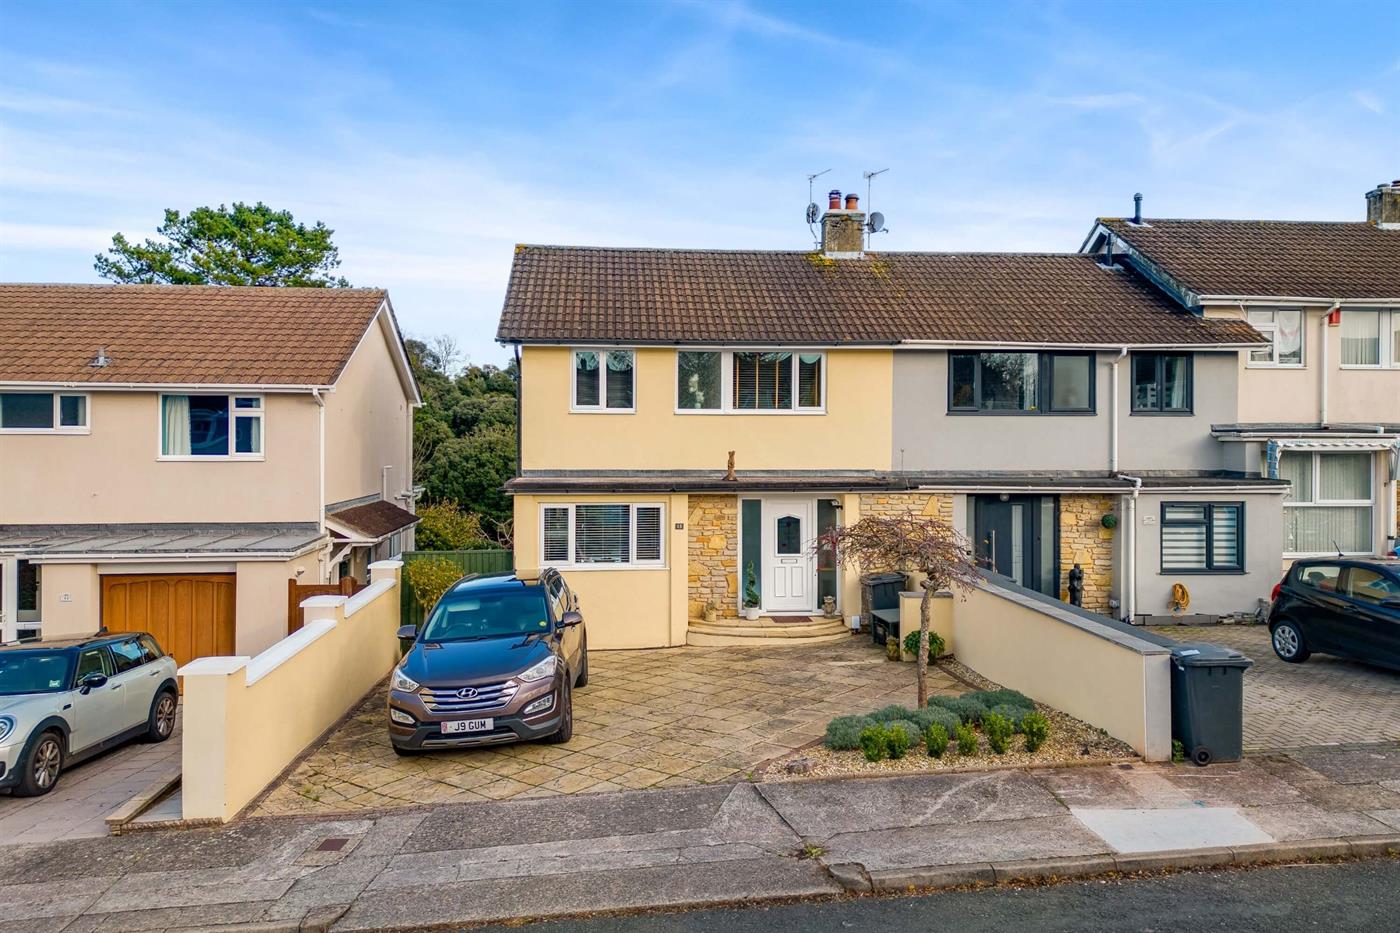 3 Bedroom End of Terrace House for Sale: Fletcher Close, Shiphay, Torquay, TQ2 6DD